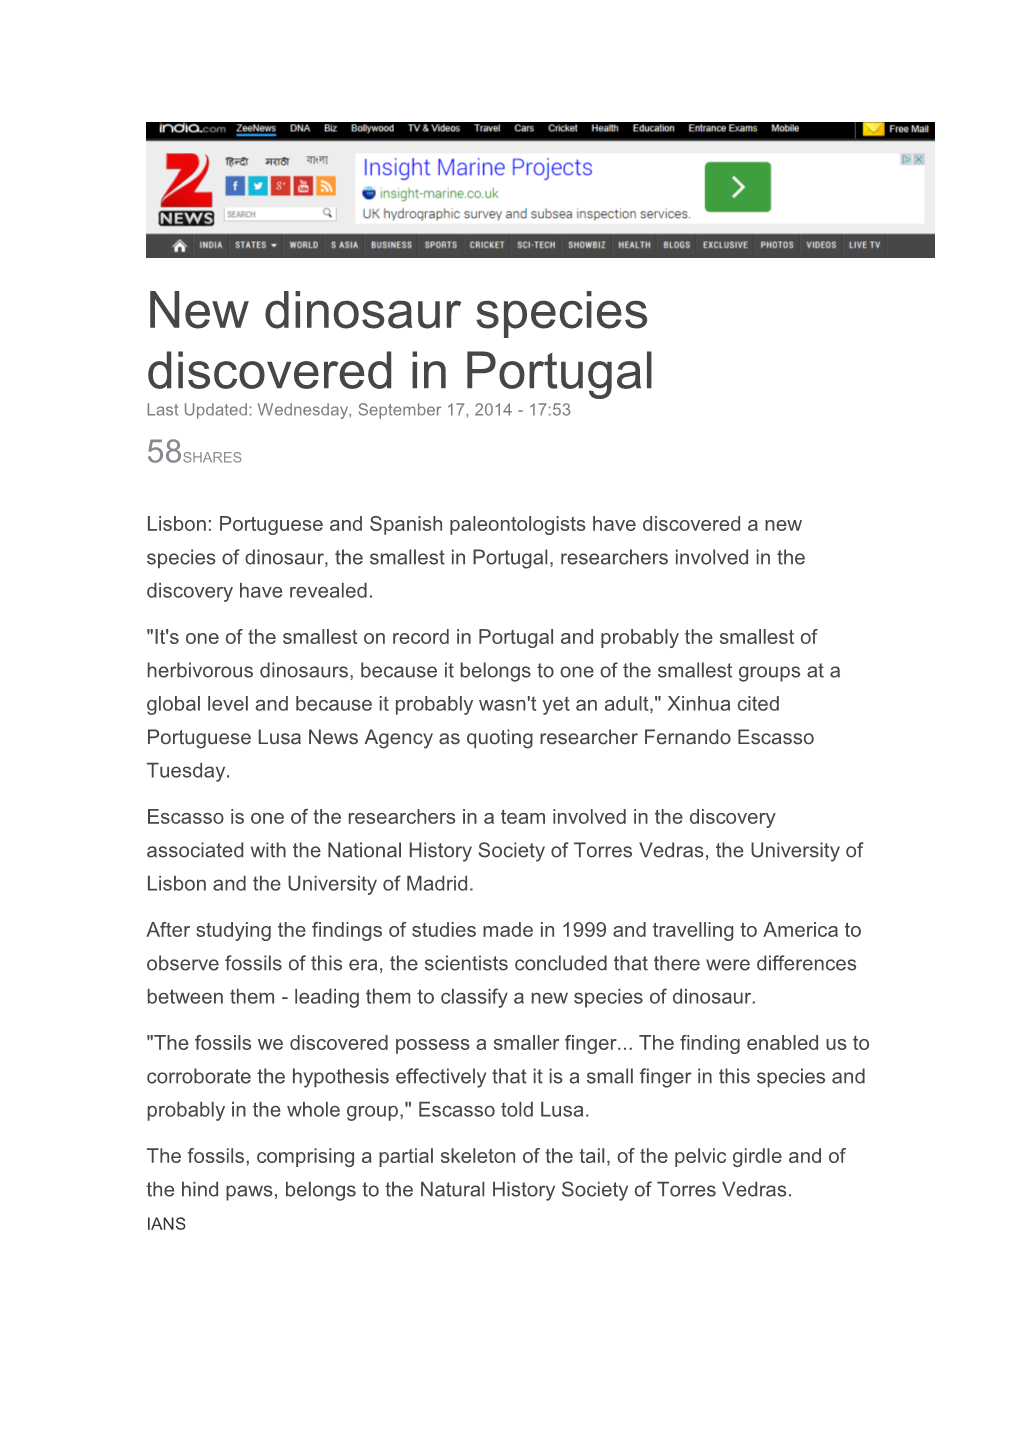 New Dinosaur Species Discovered in Portugal Last Updated: Wednesday, September 17, 2014 - 17:53